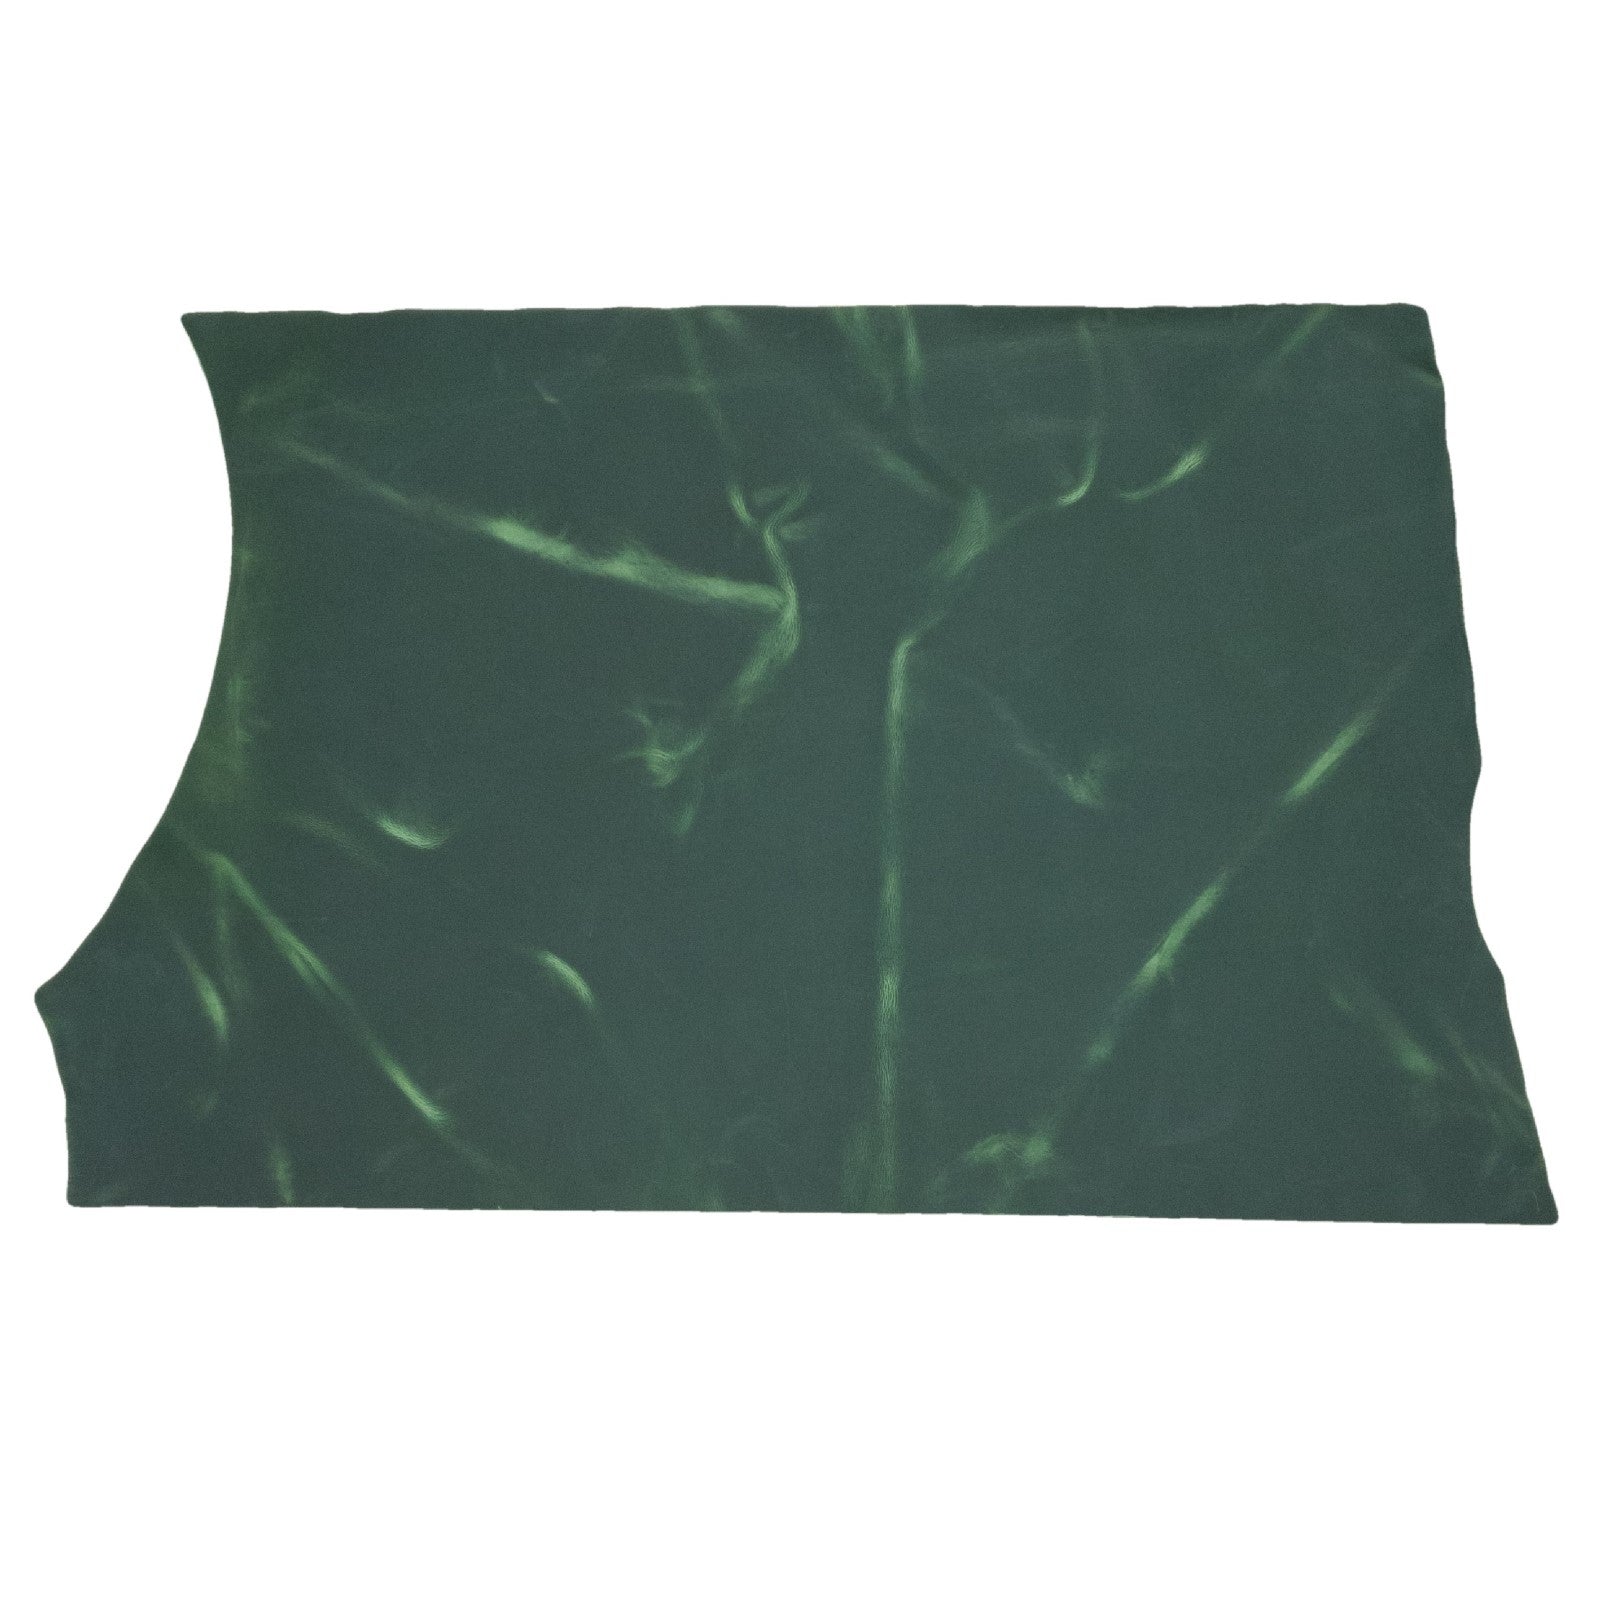 Pine Tree Green, Oil Tanned Summits Edge Sides & Pieces, 6.5-7.5 Square Foot / Project Piece (Middle) | The Leather Guy